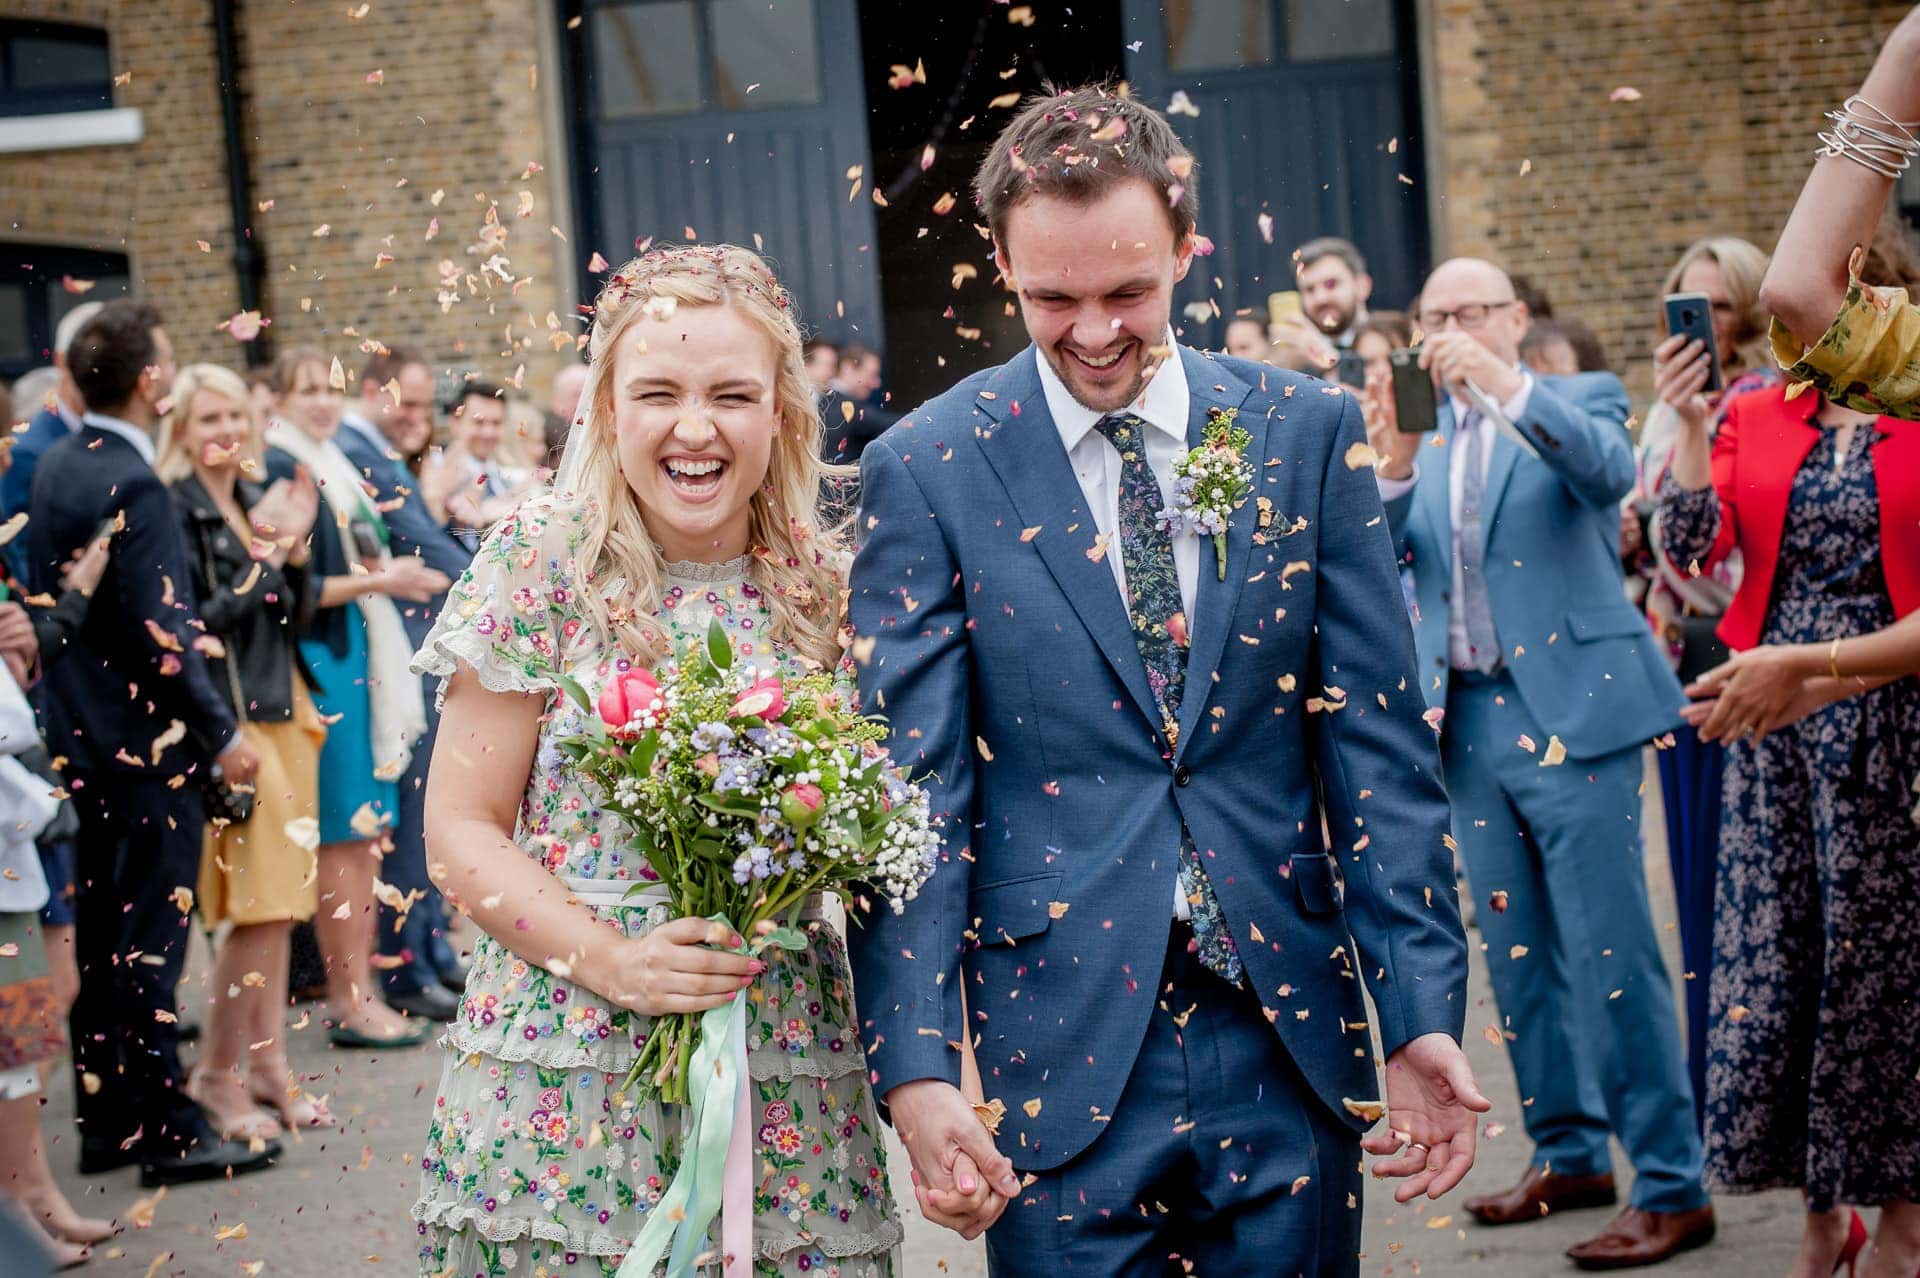 How much confetti do I need for my wedding? Biodegradable Wedding